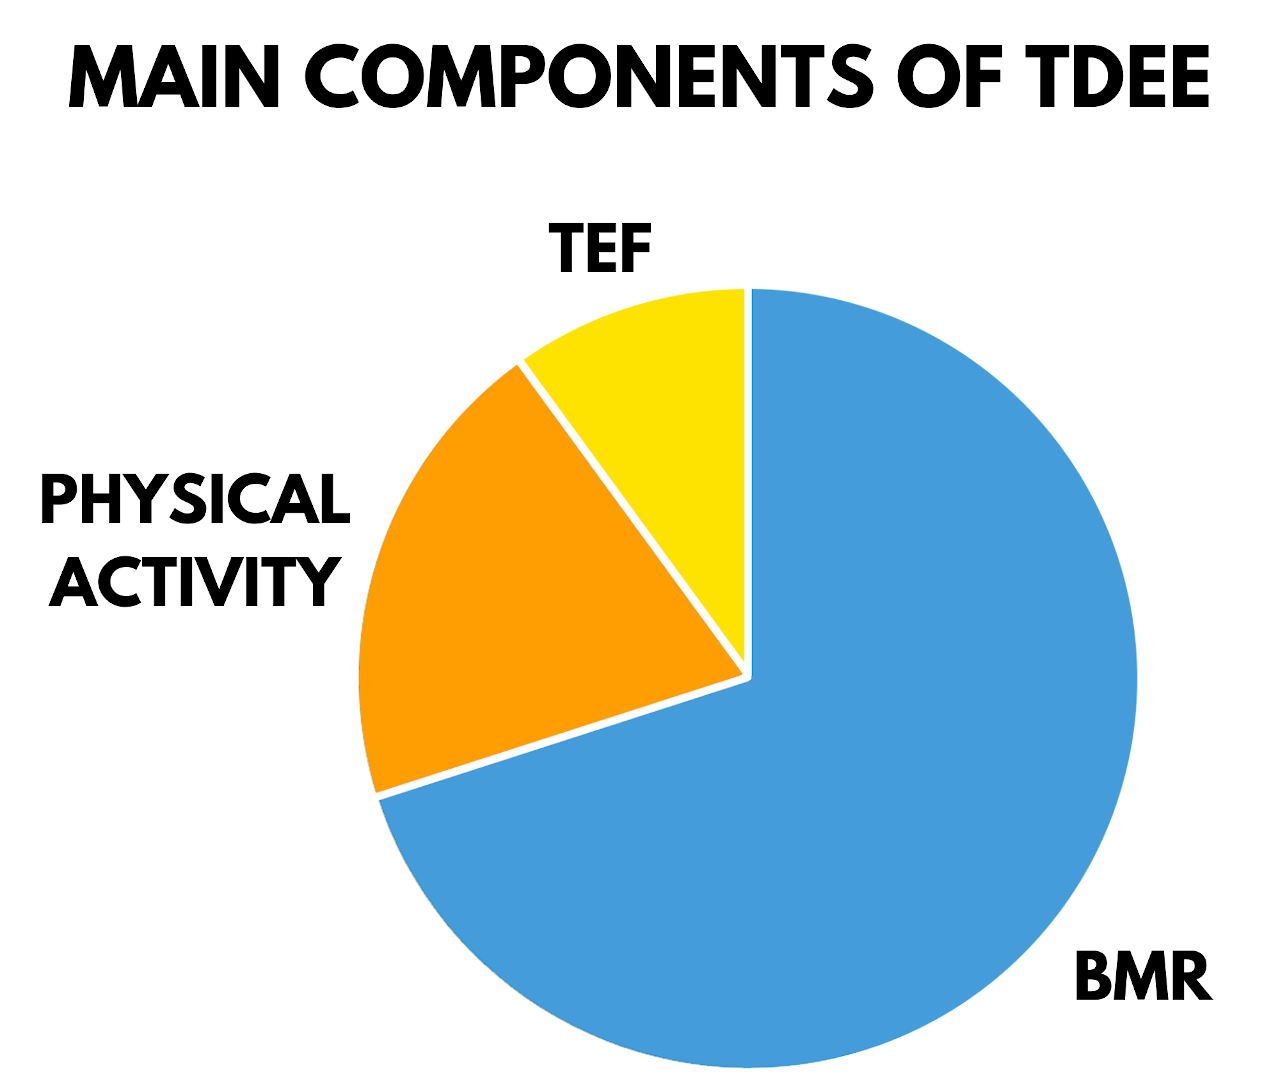 pie chart showing the three main components of TDE being BMR, physical activity, and TEF